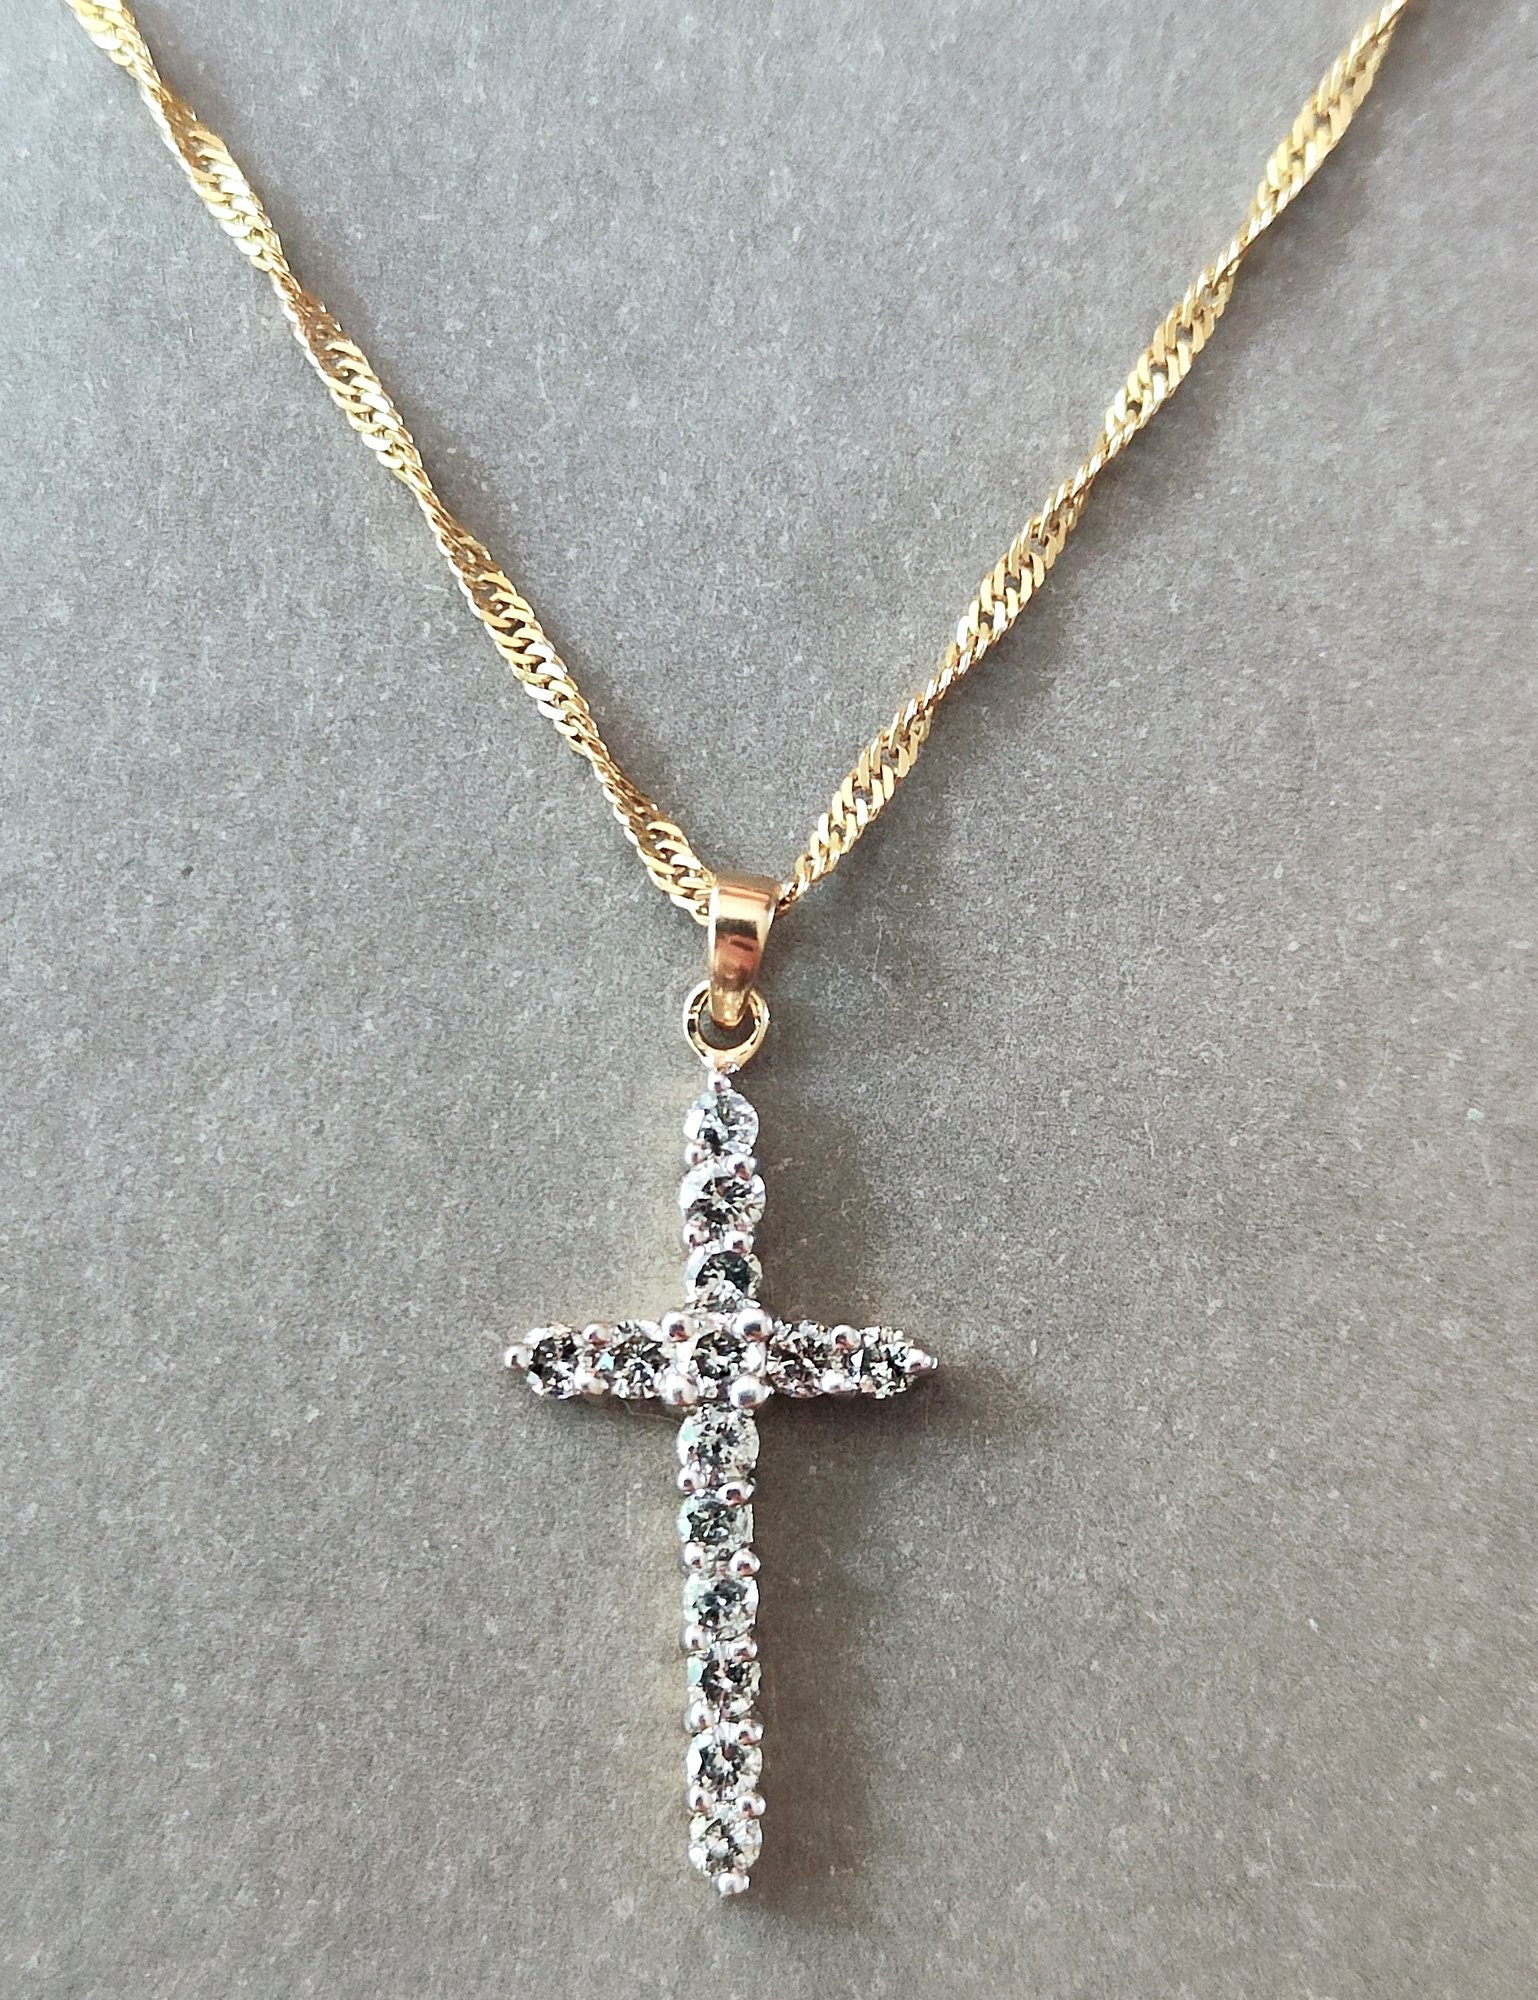 Women's Micro Diamond Gold Cross Necklace Pendant & Rope Gold Chain | The Gold Goddess